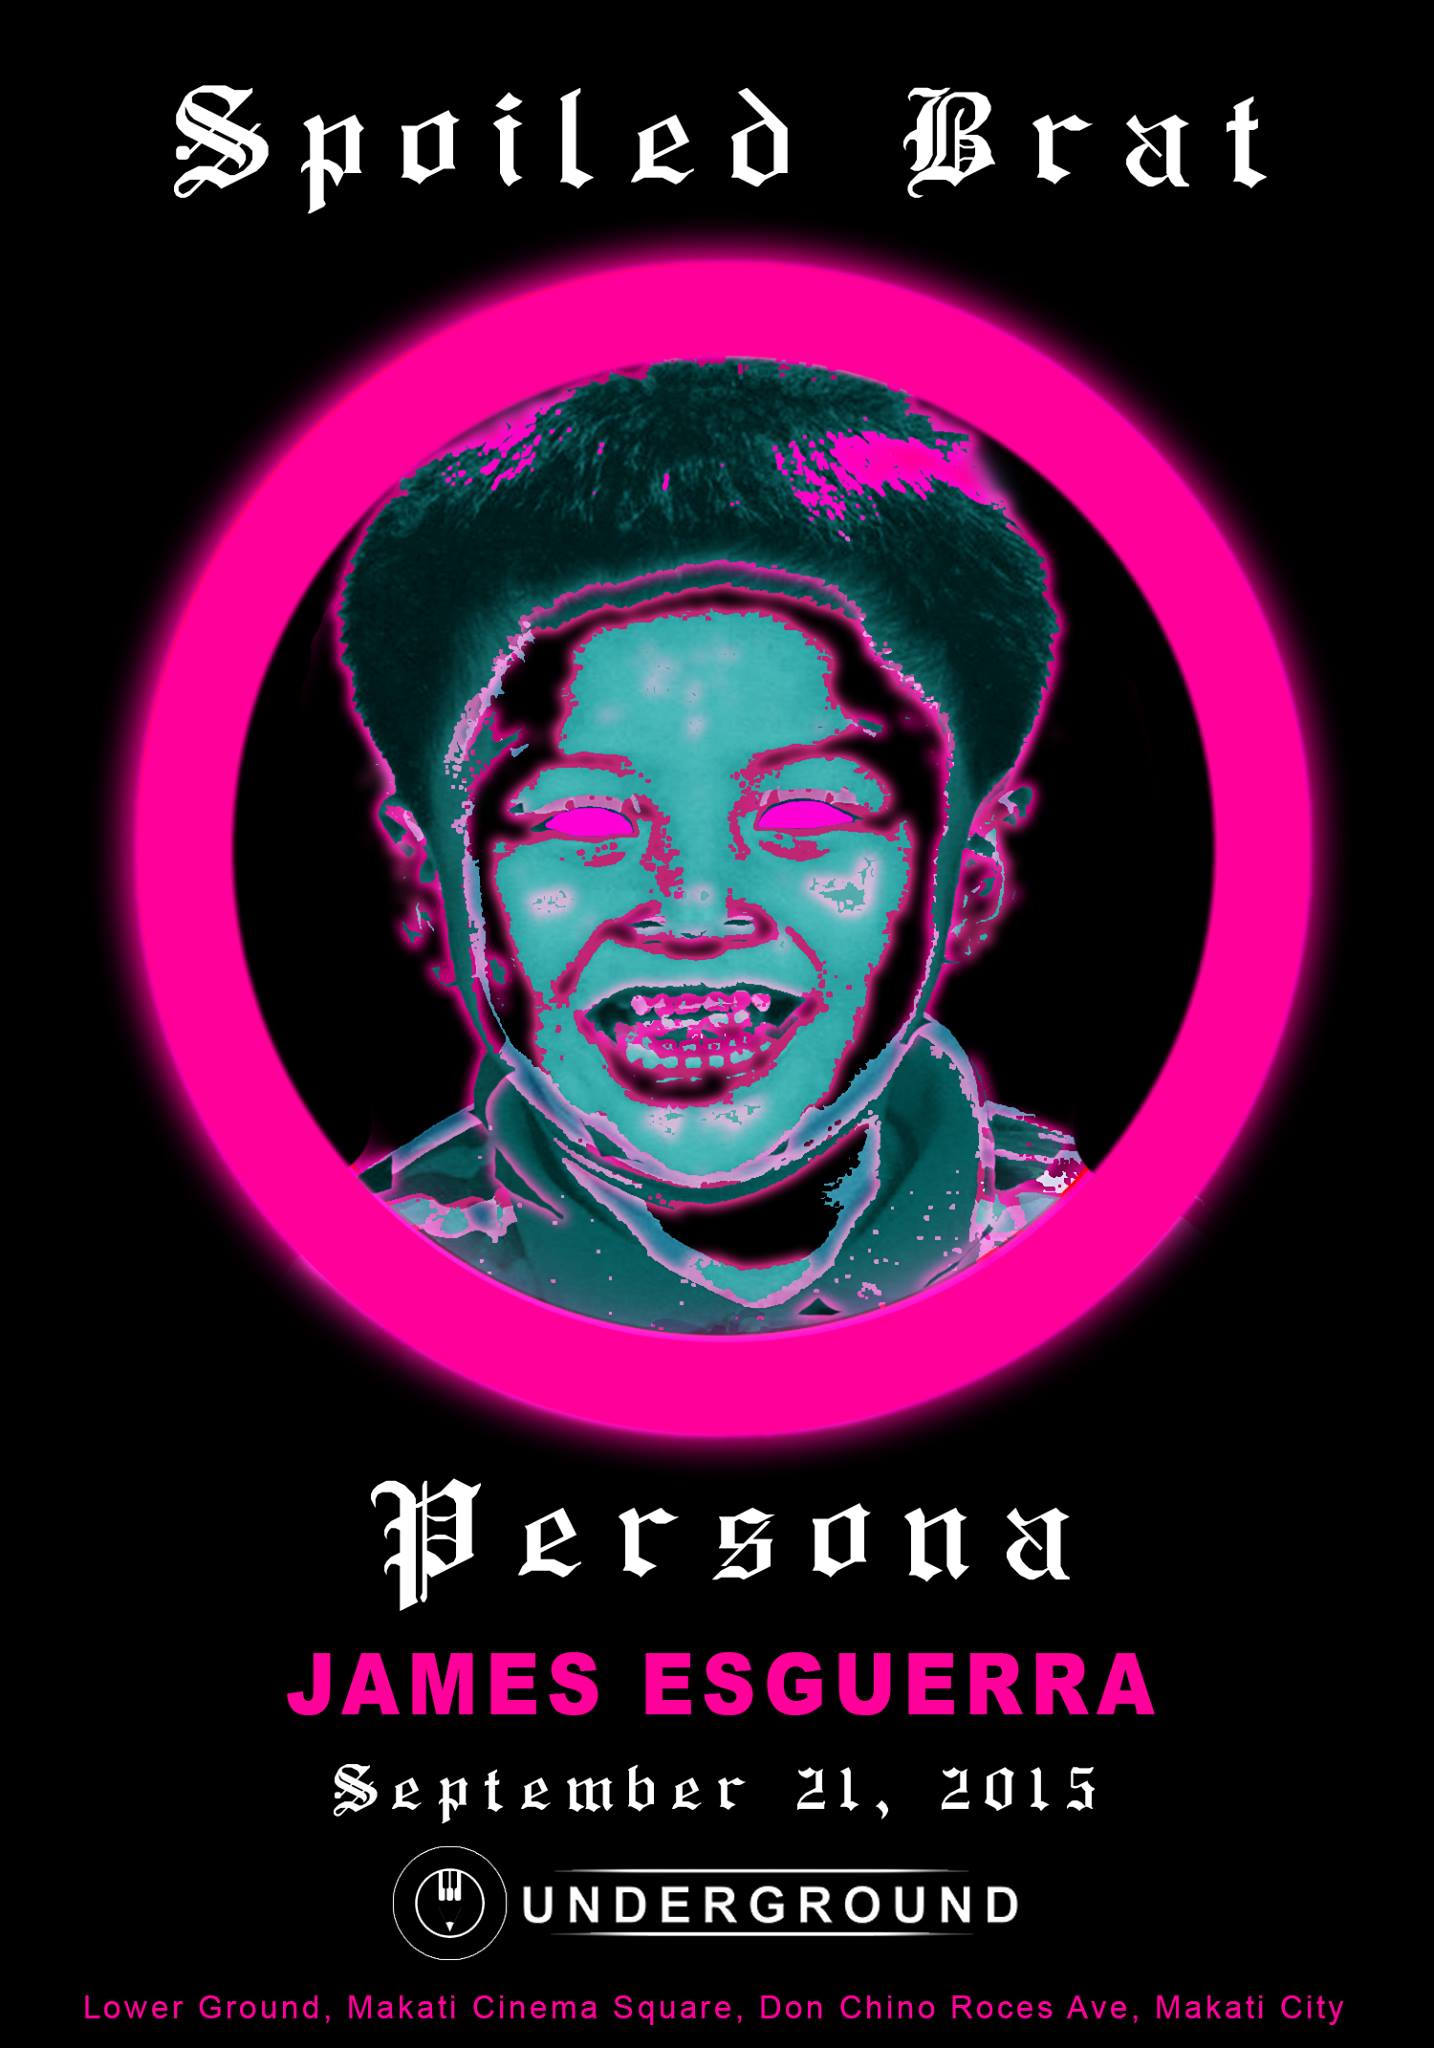 Spoiled Brat Persona - James Esguerra Monday, September 21 at 6:00pm · 90°F / 76°F Thunderstorm Show Map Underground Lower Ground & 2nd Level, Makati Square, 2130 Don Chino Roces Ave, Pio Del Pilar, Makati, National Capital Region 1231, 1223 Makati, Philippines Spoiled Brat Persona James Esguerra is an artist that creates pieces that questions uniformity, an artist that embraces the freedom of art, and celebrates its potential of retrogression and eccentricity. Spoiled Brat Persona recklessly delivers the faces of distasteful human behaviors that reeks in modern day society. Personalities in our present day sprouts crowds of wannabe demigods, self-proclaimed “Einsteins”, and babies pretending to have been born with silver spoons in their mouths, are some of the conceptual inspiration for this exhibition. Unpleasant traits that would be put in a bad light in the olden days, are now undeniably a trend, a bad, untouchable trend, making this a very interesting theme that Esguerra has pursued. A showcase of self-obsession, avaricious characters, and untamed autocratic traits, will be laid out in a grim, yet comical manner, a method where he is at always at ease. To tackle such theme for most artists, there is an ulterior motive for mankind’s refinement, a supposed eye-opener, a call for change per se, but for Esguerra, it simply is for the sake of having a subject to do what he loves to do, which is to shock, offend and make people laugh all at the same time through his paintings. To better understand his point, envision a revolution that aims for no change, a nonchalant abuse of fallacies without seeking to correct its audiences, a relentless assault and mockery of the fabricated reality created by man while being so carefree, disregarding the opinions of society. In this show, expect an ocular symphony of warm neon and pastel colors paired with grotesque and goofy-looking characters, catastrophic elements, and mundane symbol